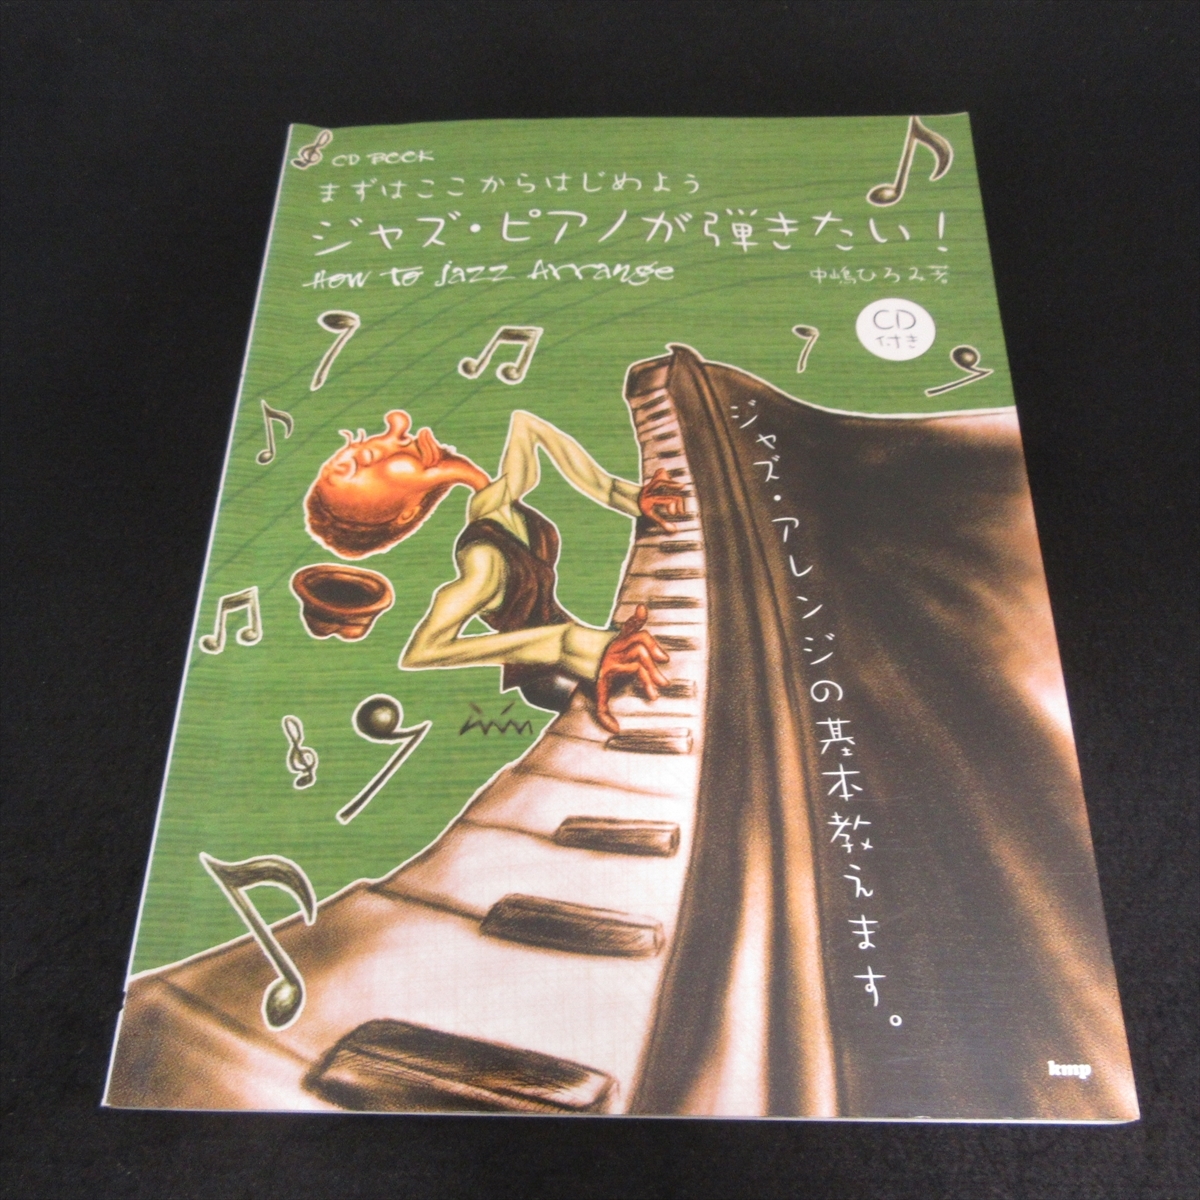 CD attaching ( unopened ) JAZZ piano manual [ first of all from here let's start Jazz piano ... want!] # sending 170 jpy middle ....kmp * use impression equipped musical score *